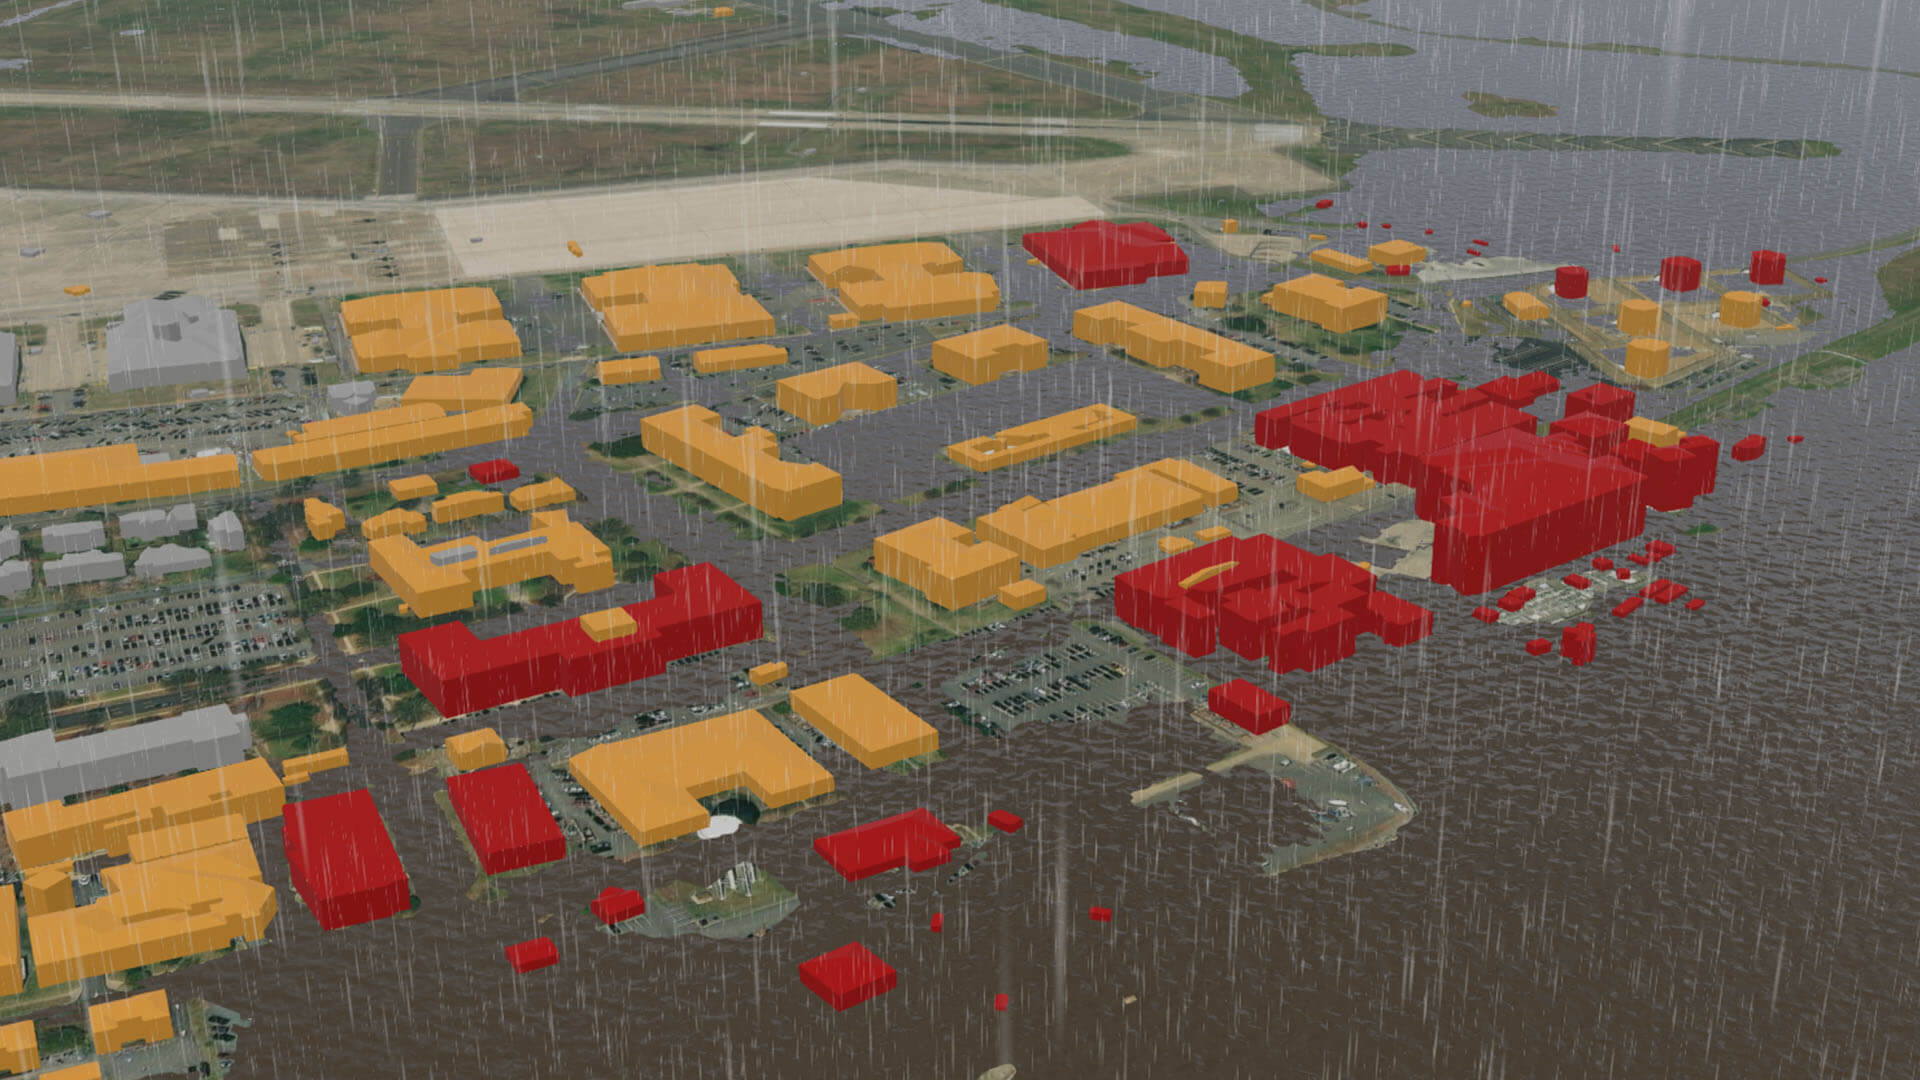 3D GIS software models storm impacts on a cluster of buildings